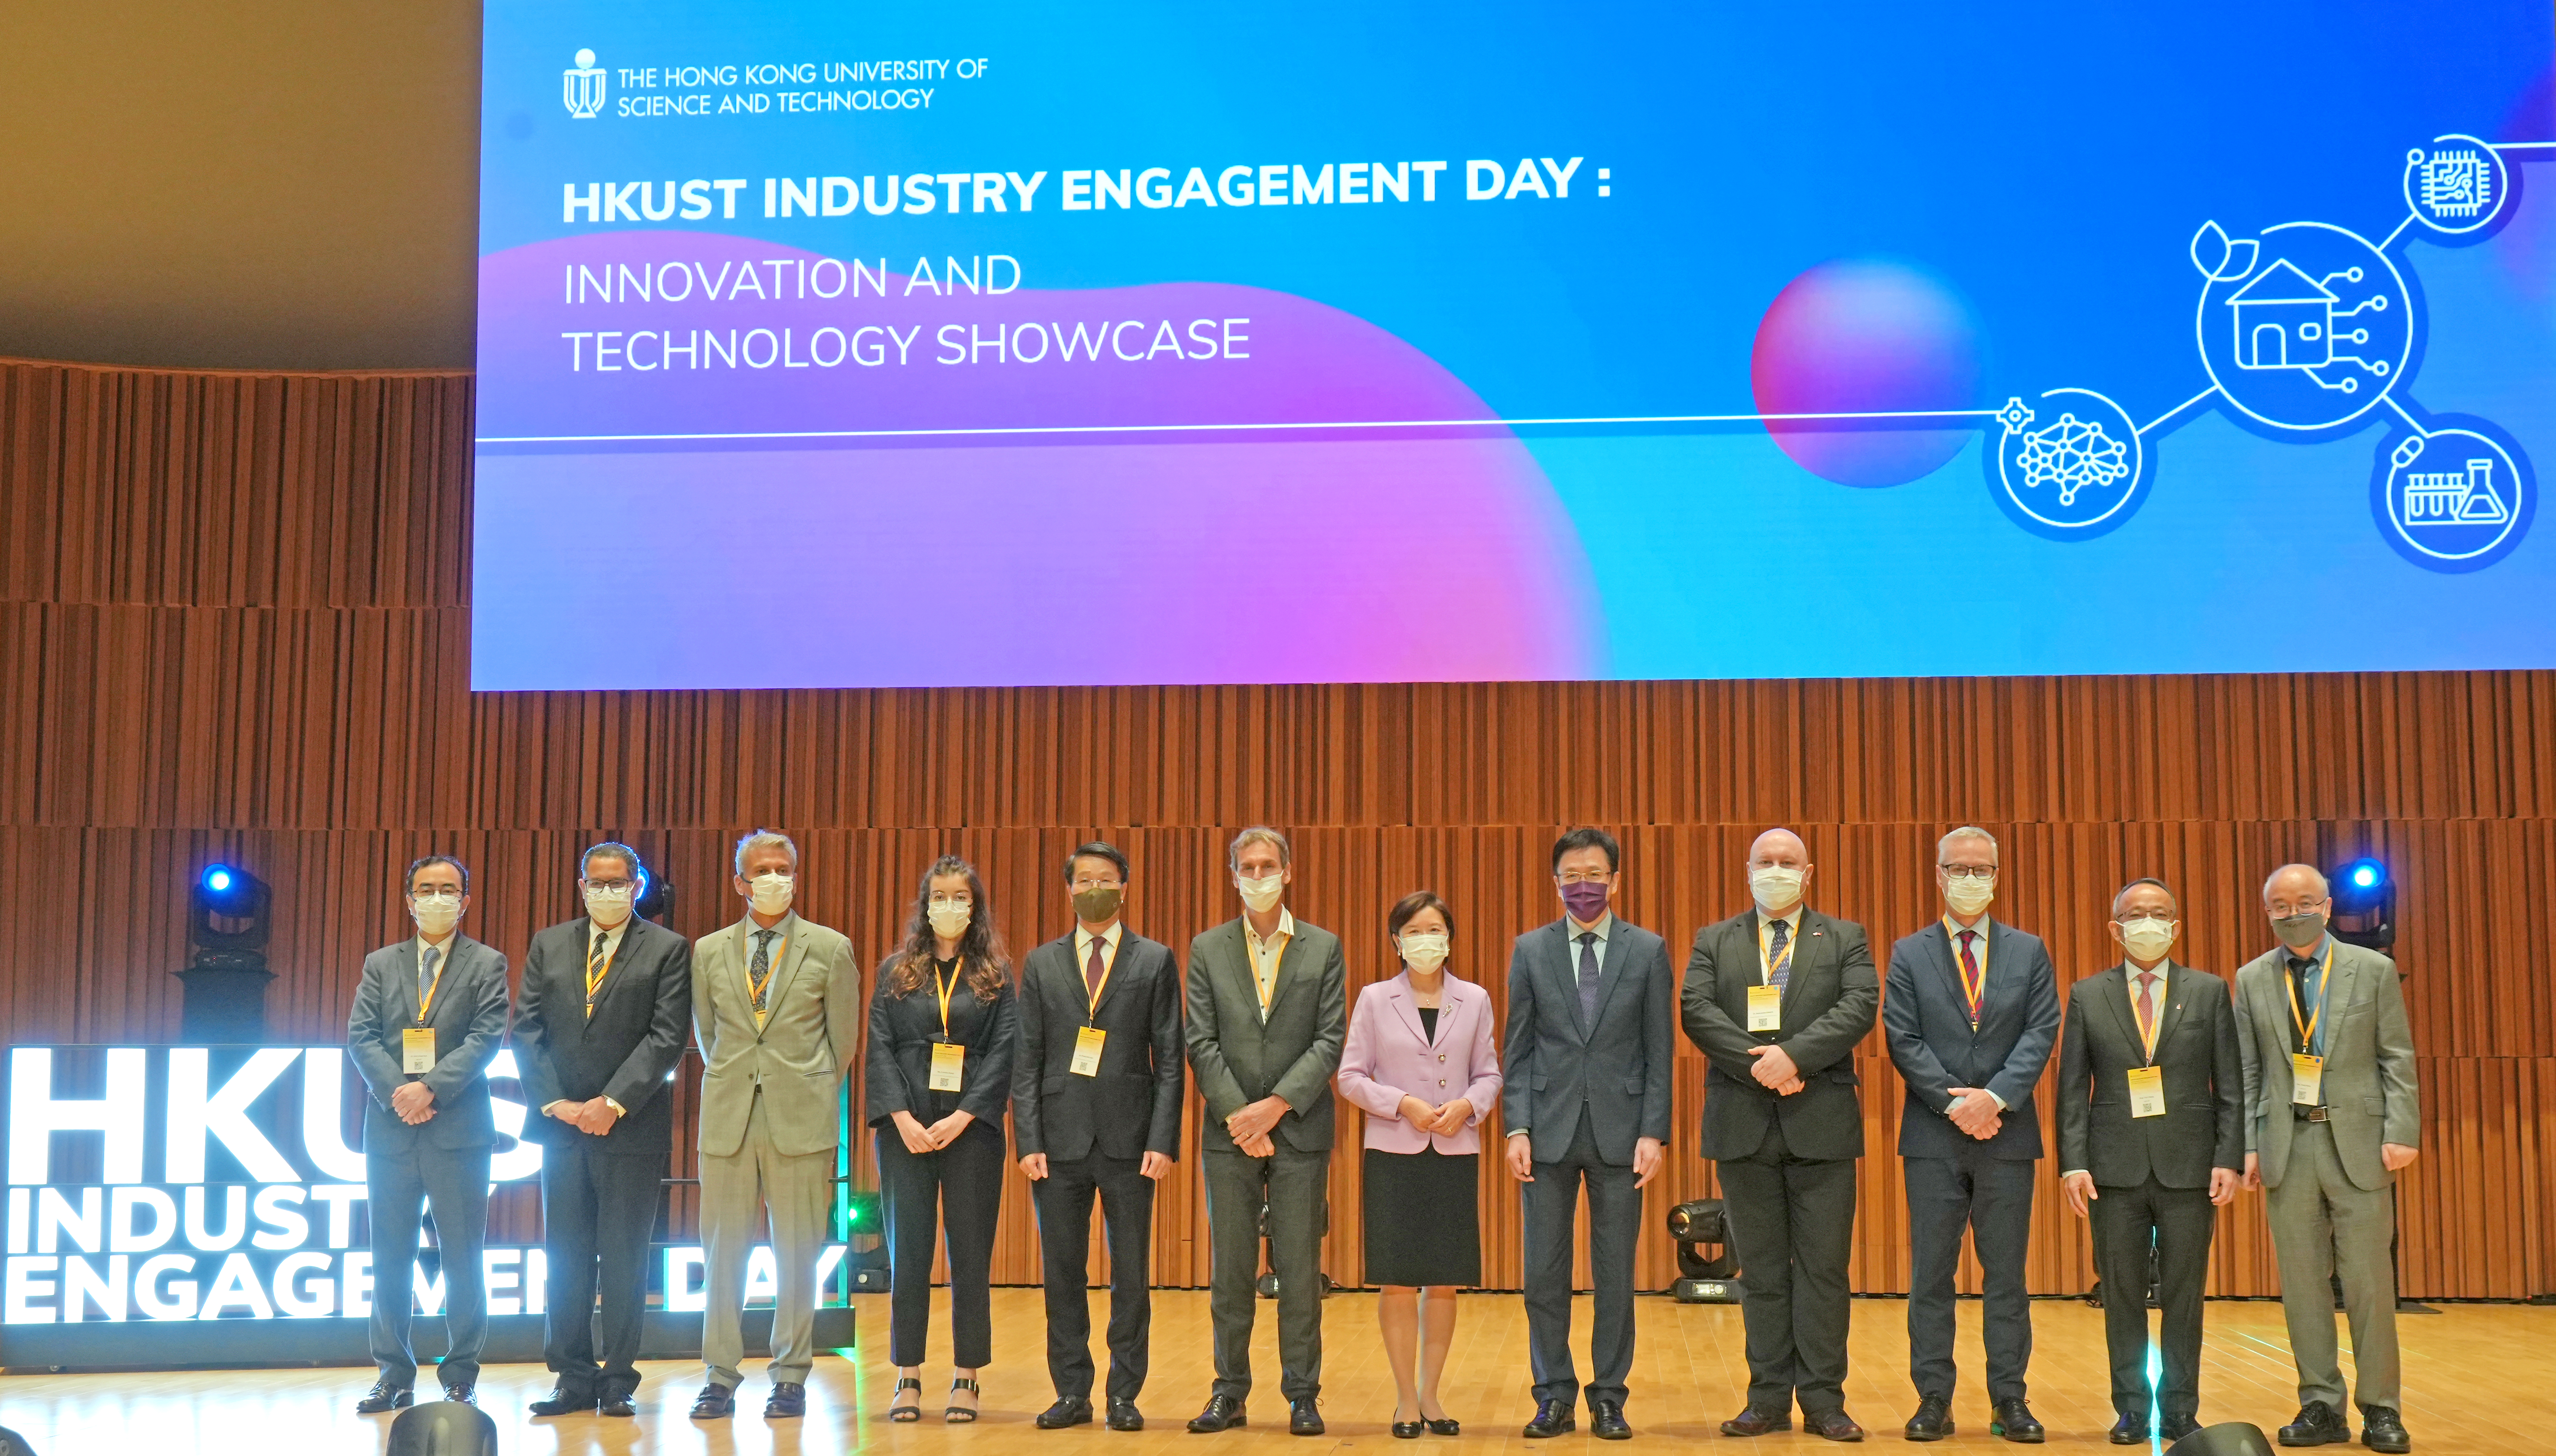 Representatives of the European Union and Consul Generals from multiple countries attend the Industry Engagement Day